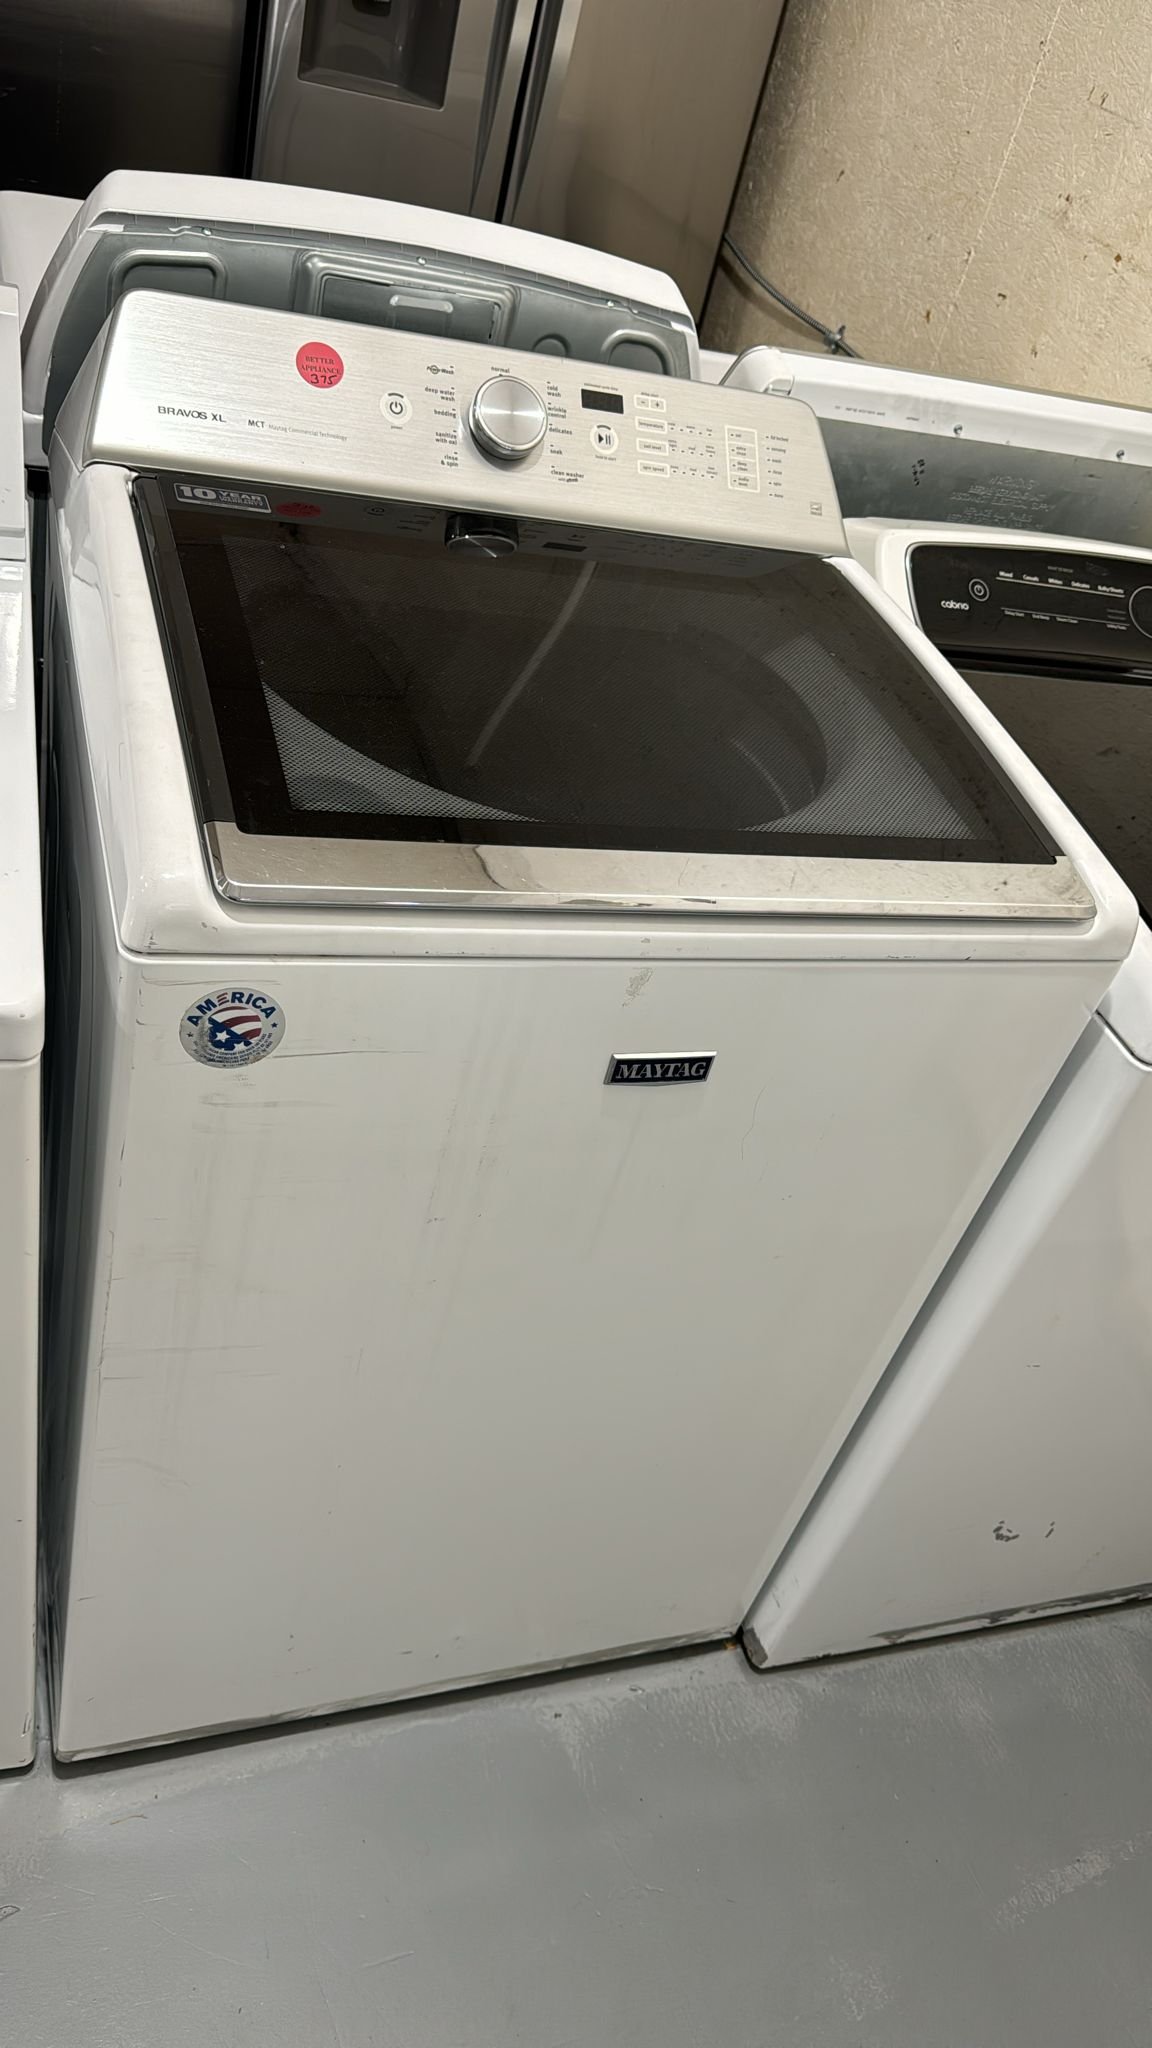 Maytag Like New Top Load Washer – White